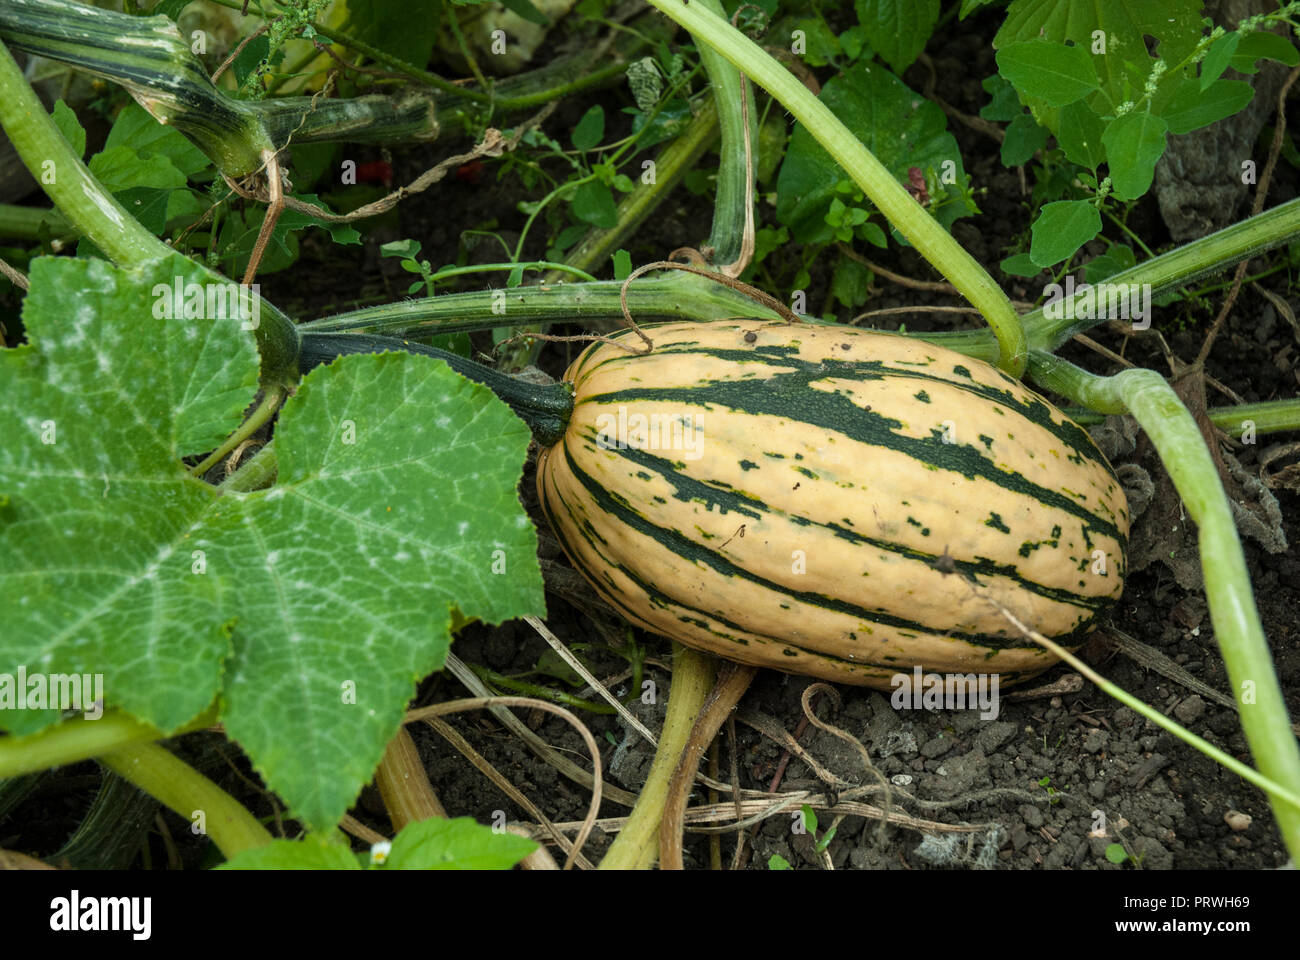 Cream with green striped Honey Boat squash pumpkin growing, with foliage. Stock Photo